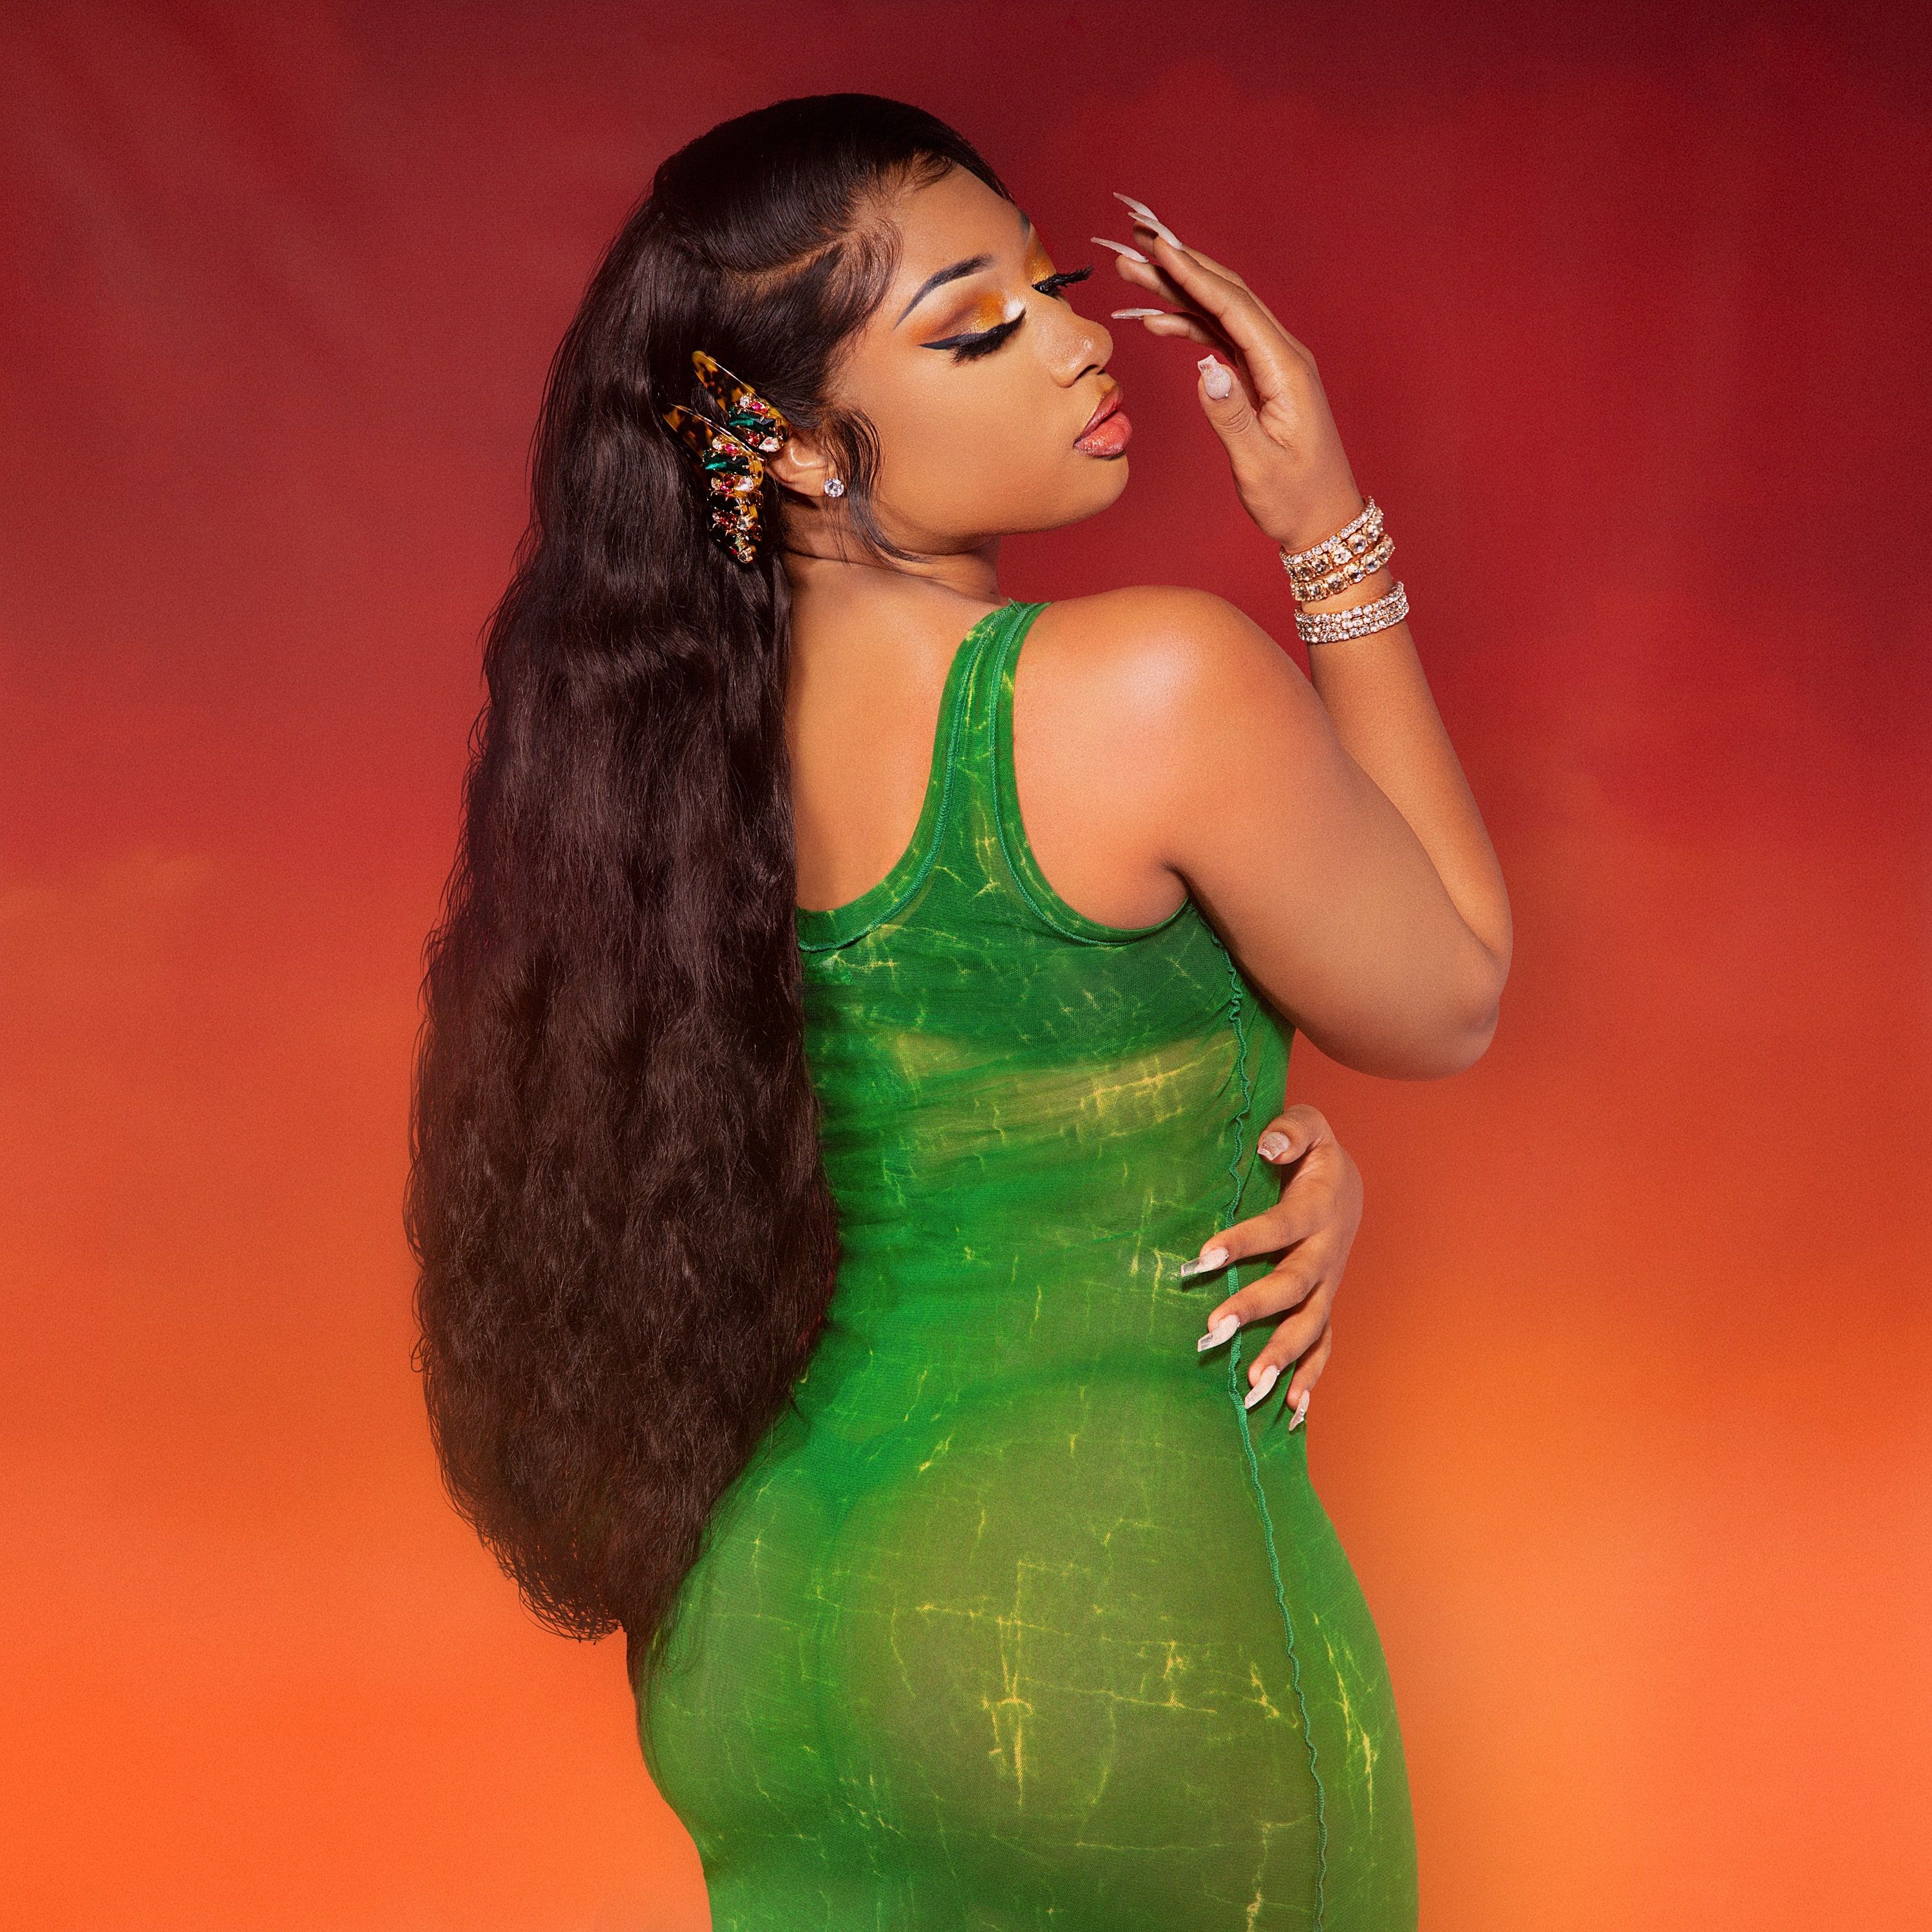 Megan Thee Stallion on Beyoncé, “Texas Fever, ” and Selling Her “Hot Girl Summer” Wardrobe on Depop